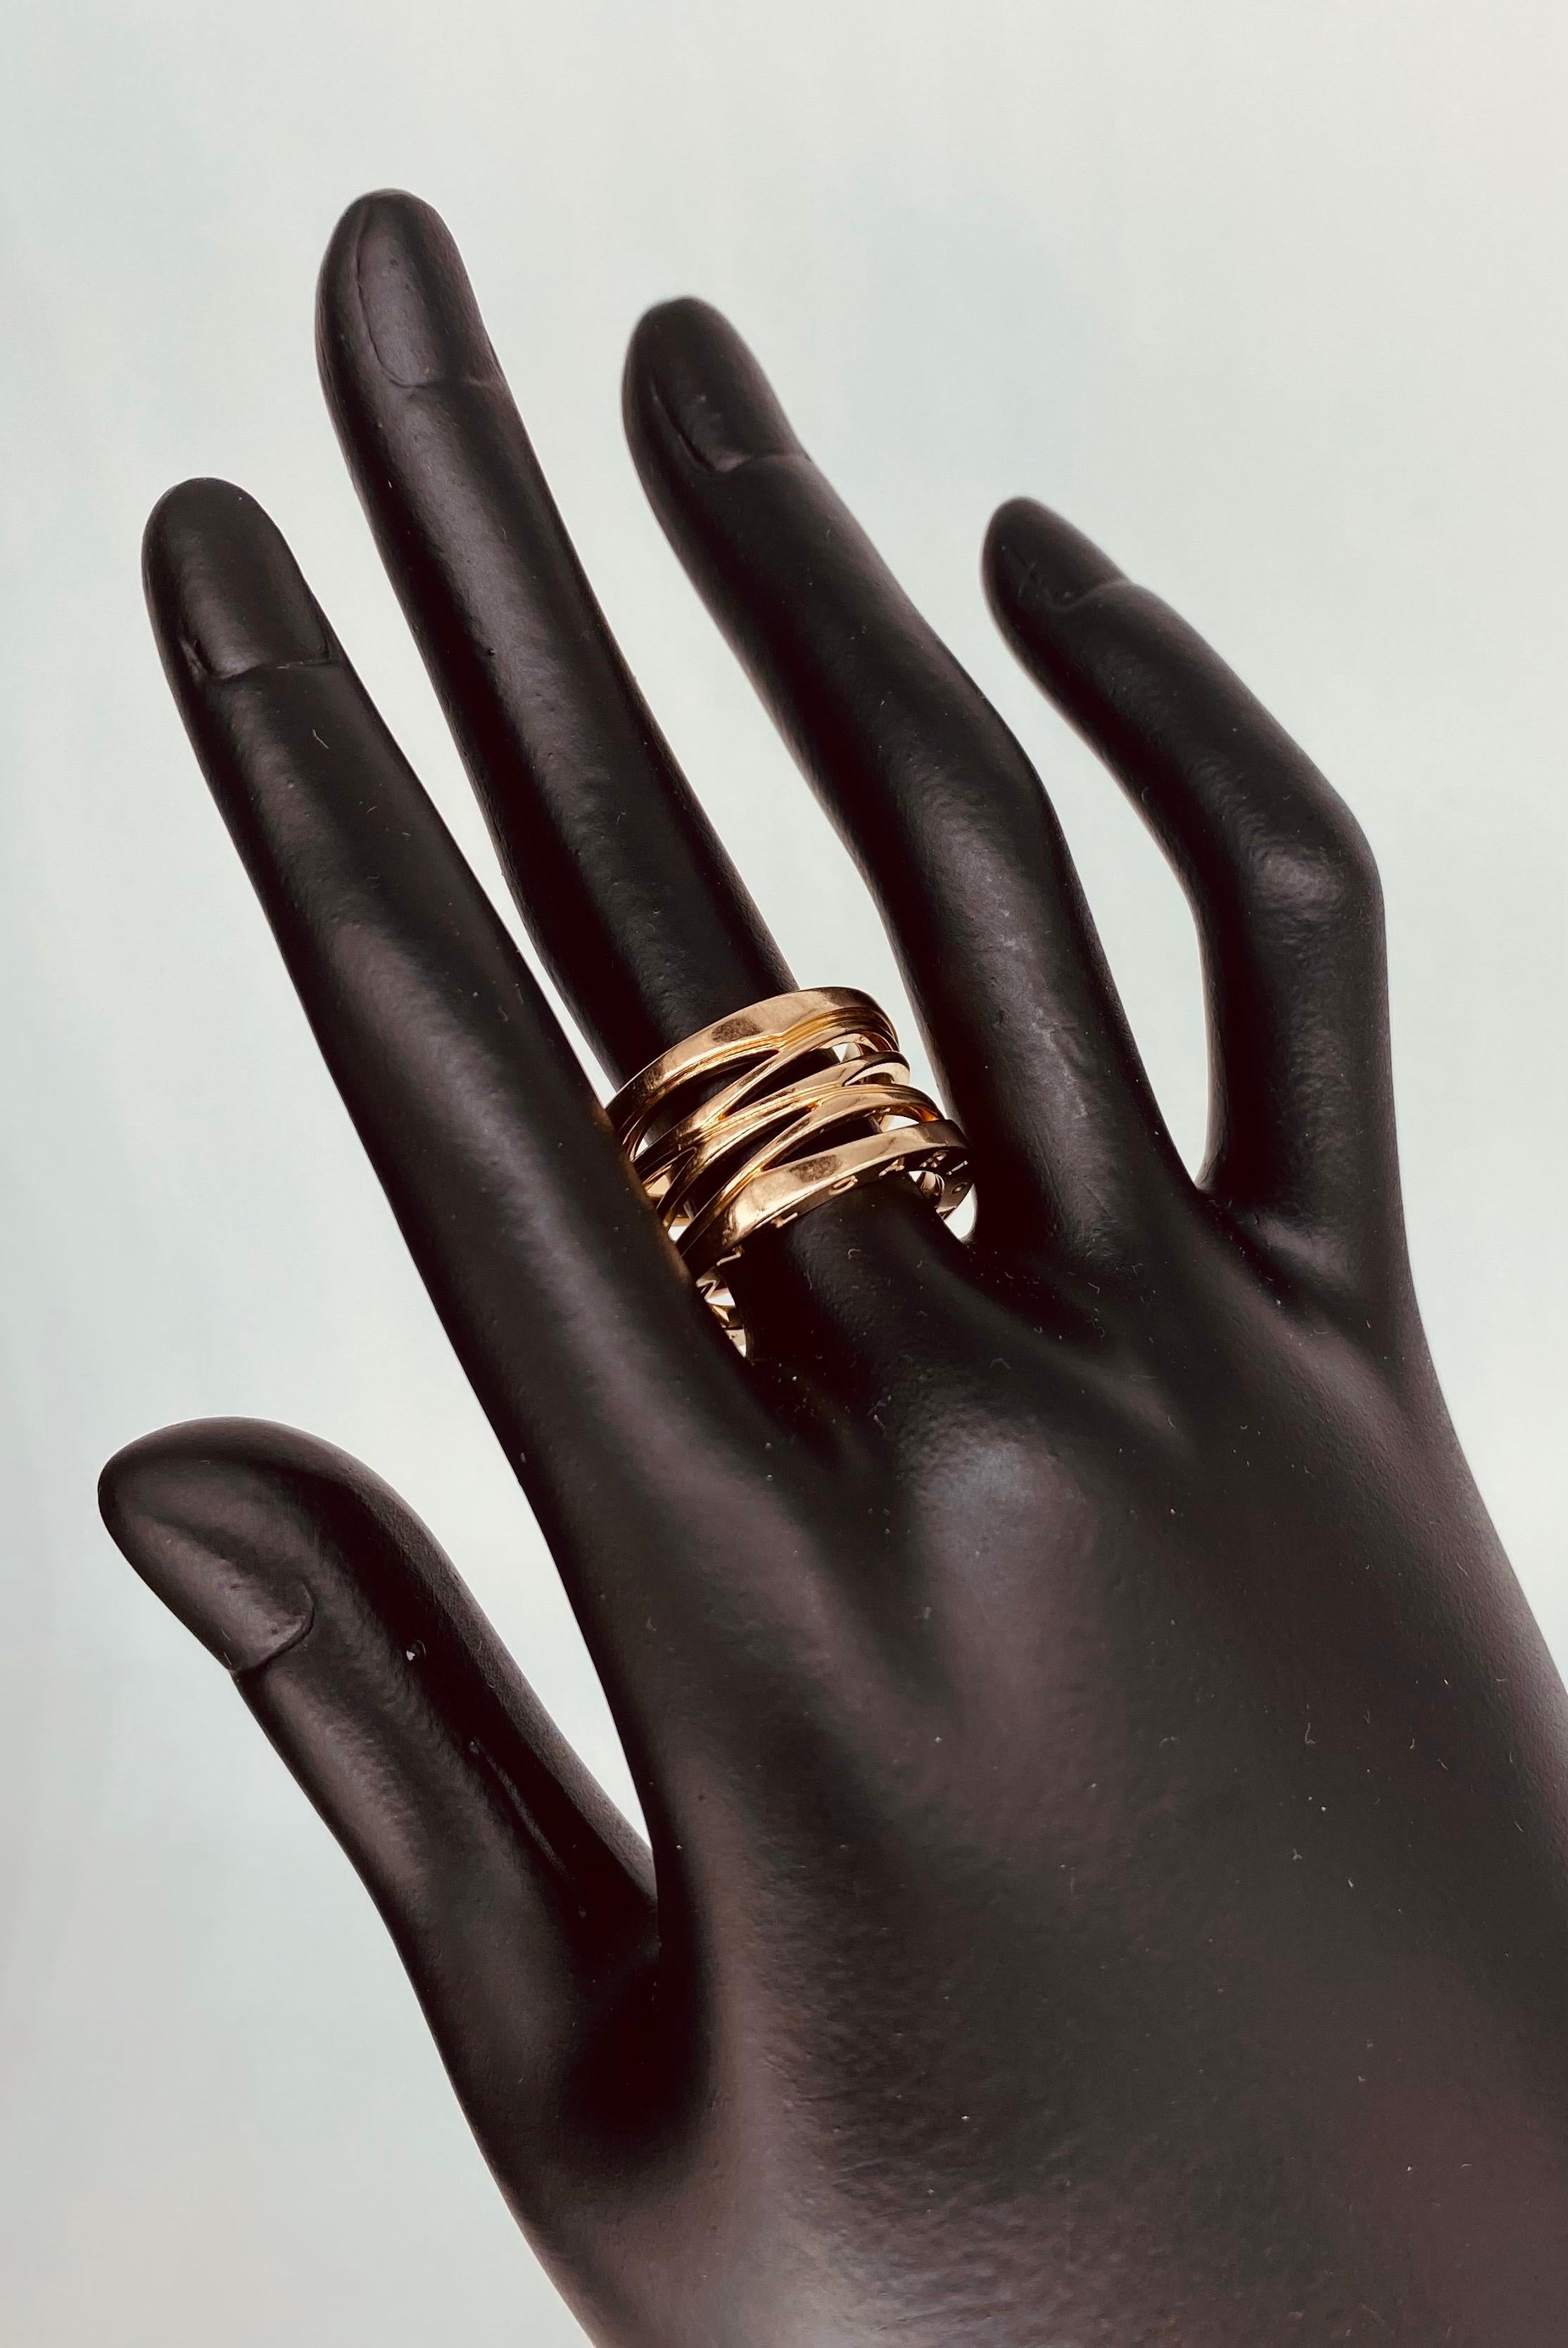 Bvlgari 18k Rose Gold B.ZERO1 3 Band Ring - Size 6
Inspired by the rigorous architecture of Rome’s iconic Colosseum, executed with an innovative and unconventional approach to jewelry design, B. zero1 celebrates the inspiring power of bold vision. A